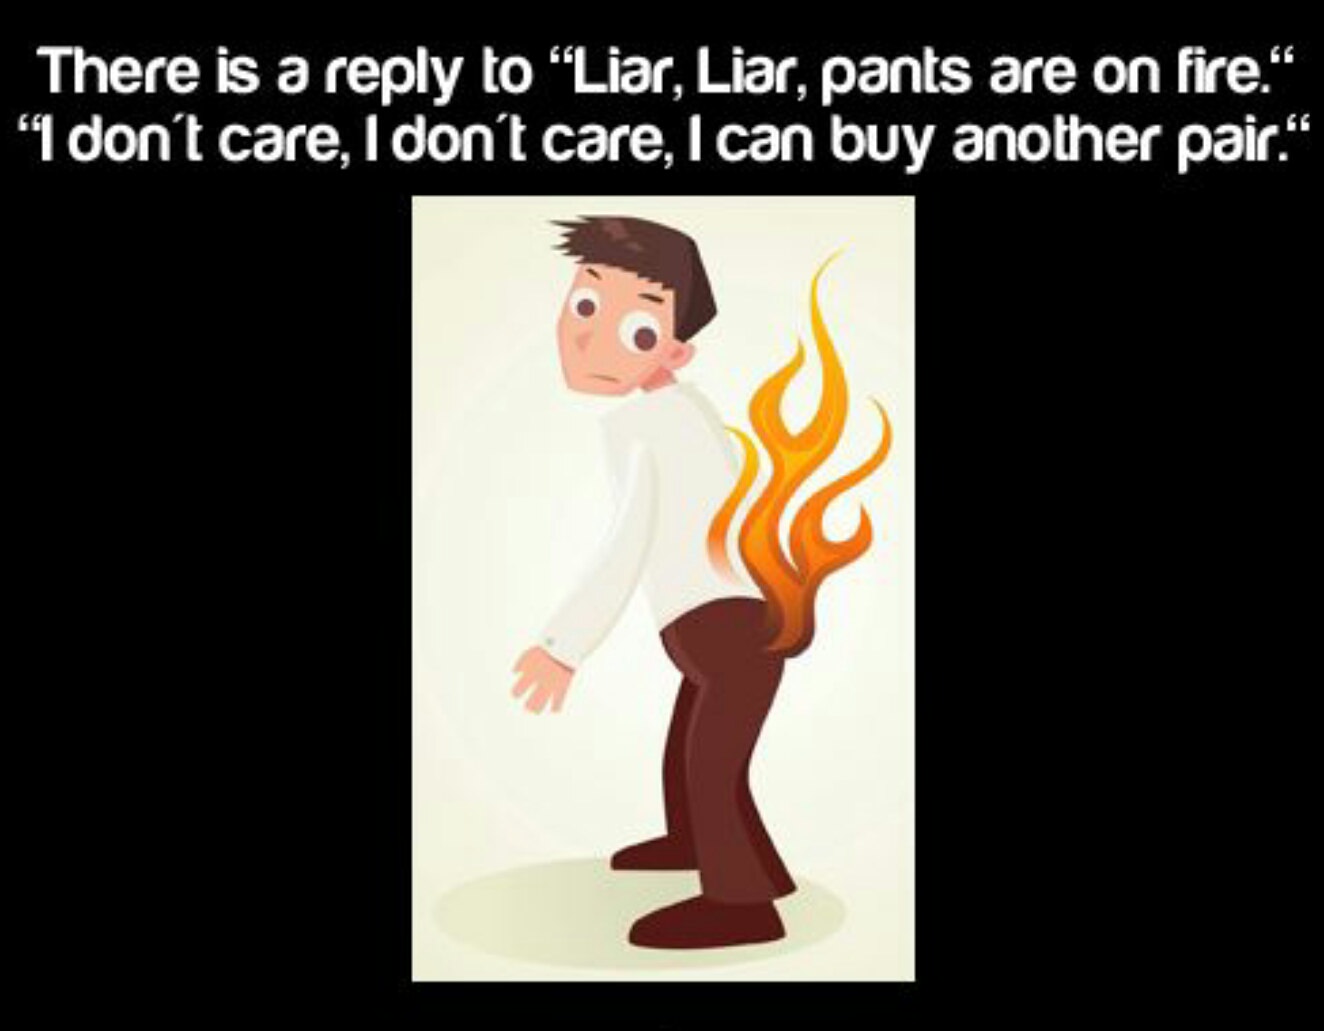 funny i never knew that facts - 30 There is a to Liar, Liar, pants are on fire." "I don't care, I don't care, I can buy another pair."